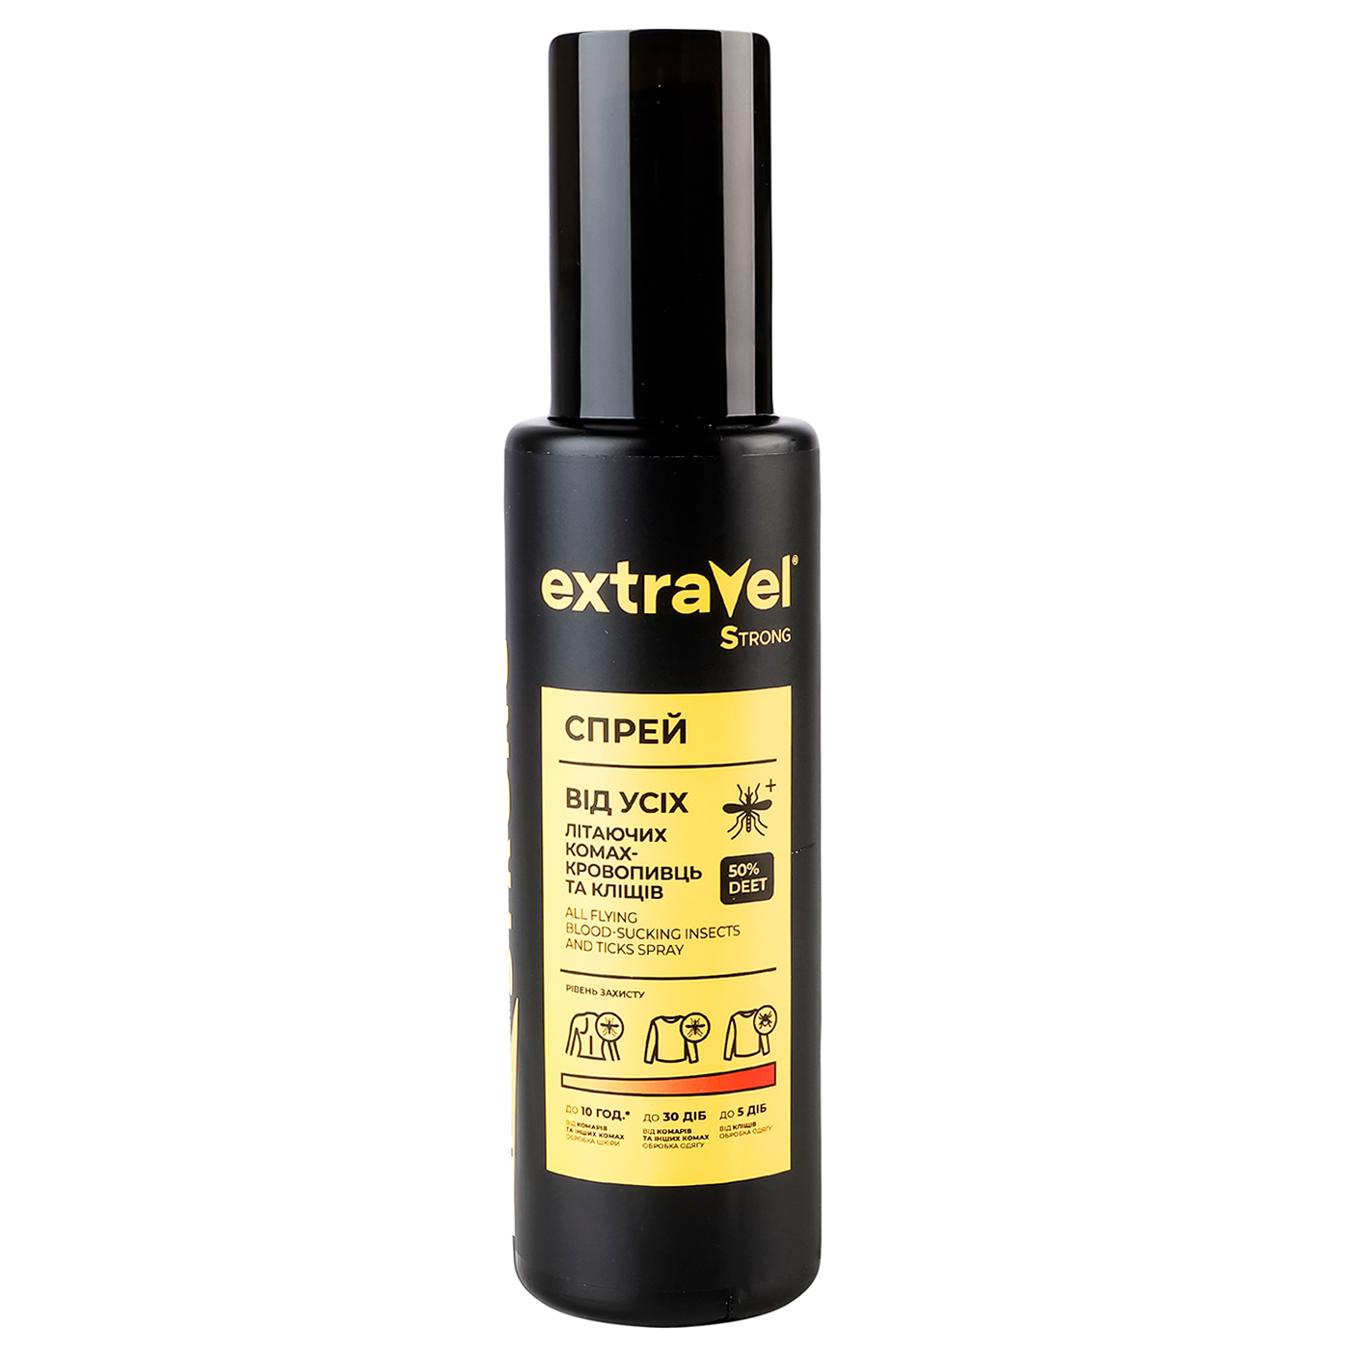 Extravel Strong spray against all flying blood-sucking insects and ticks for extreme conditions 100ml